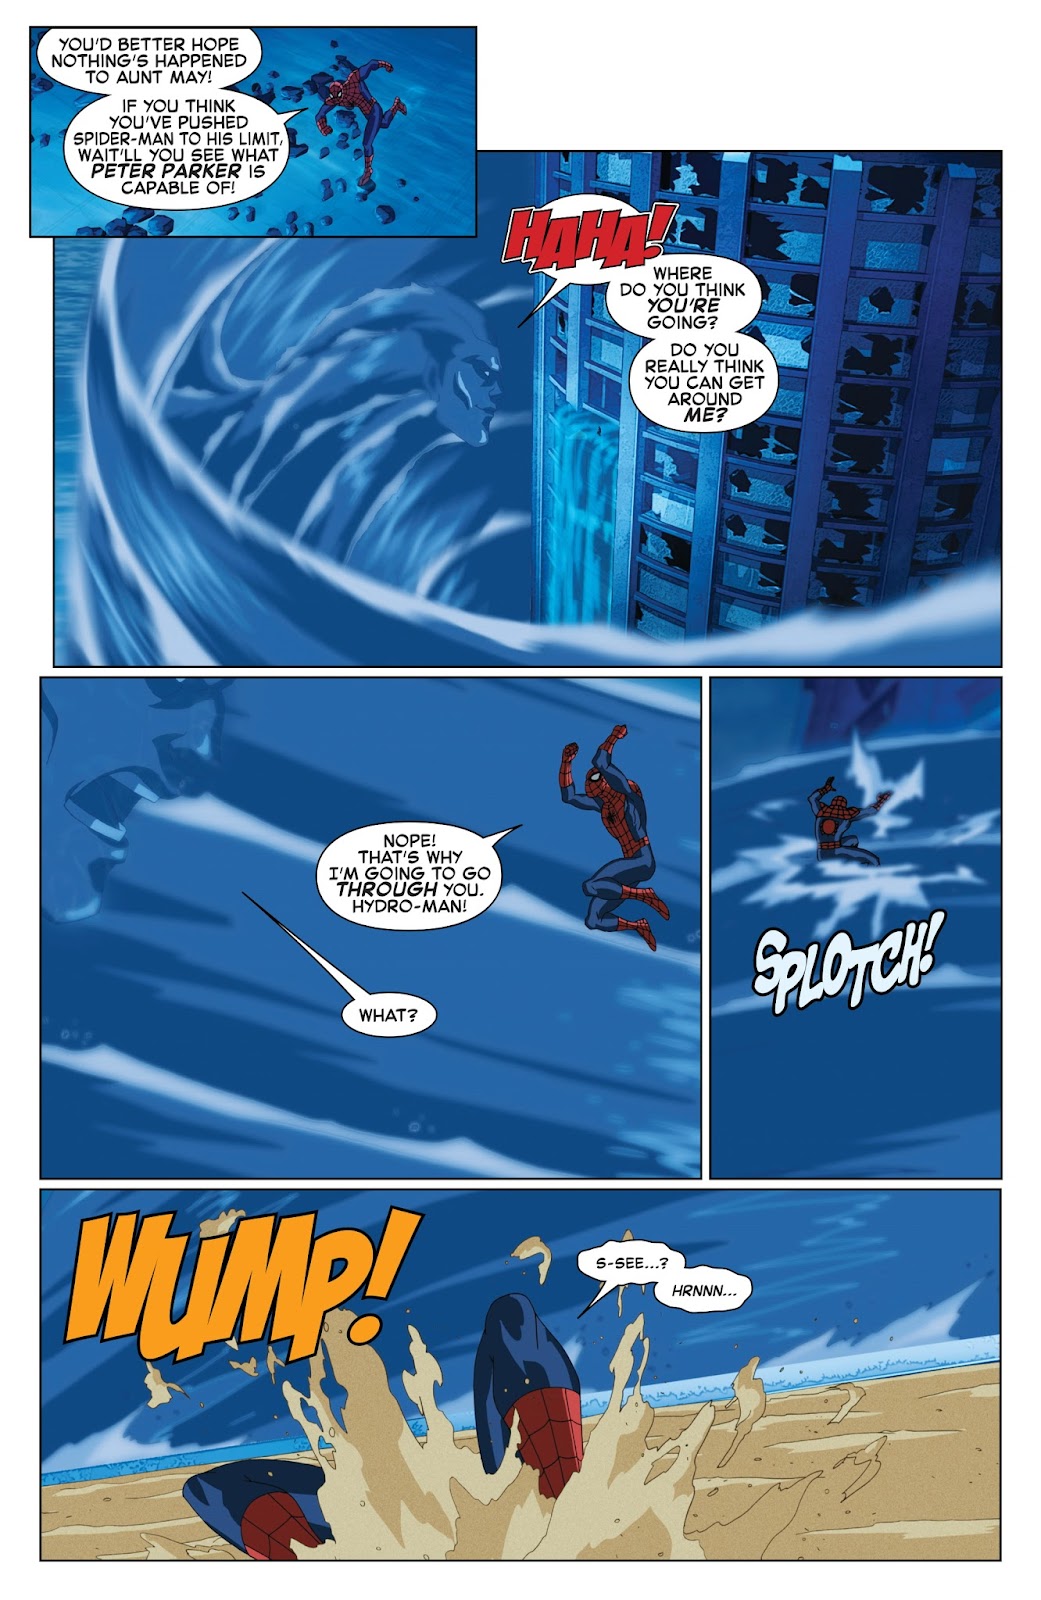 Marvel Universe Ultimate Spider-Man Vs. The Sinister Six issue 11 - Page 6